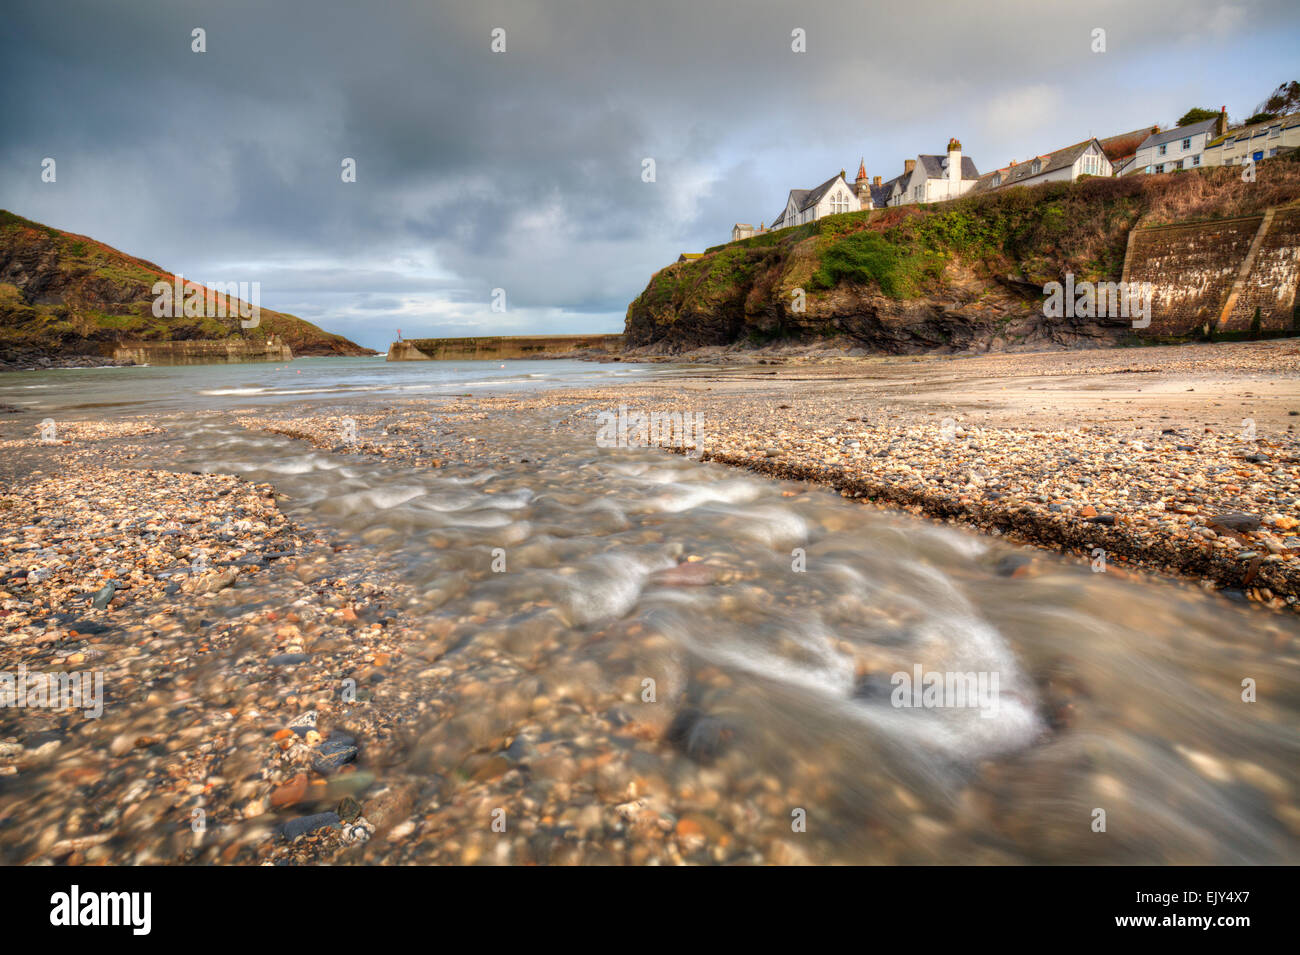 The stream on the beach at Port Isaac on the North coast of Cornwall, captured in mid January using a long shutter speed. Stock Photo